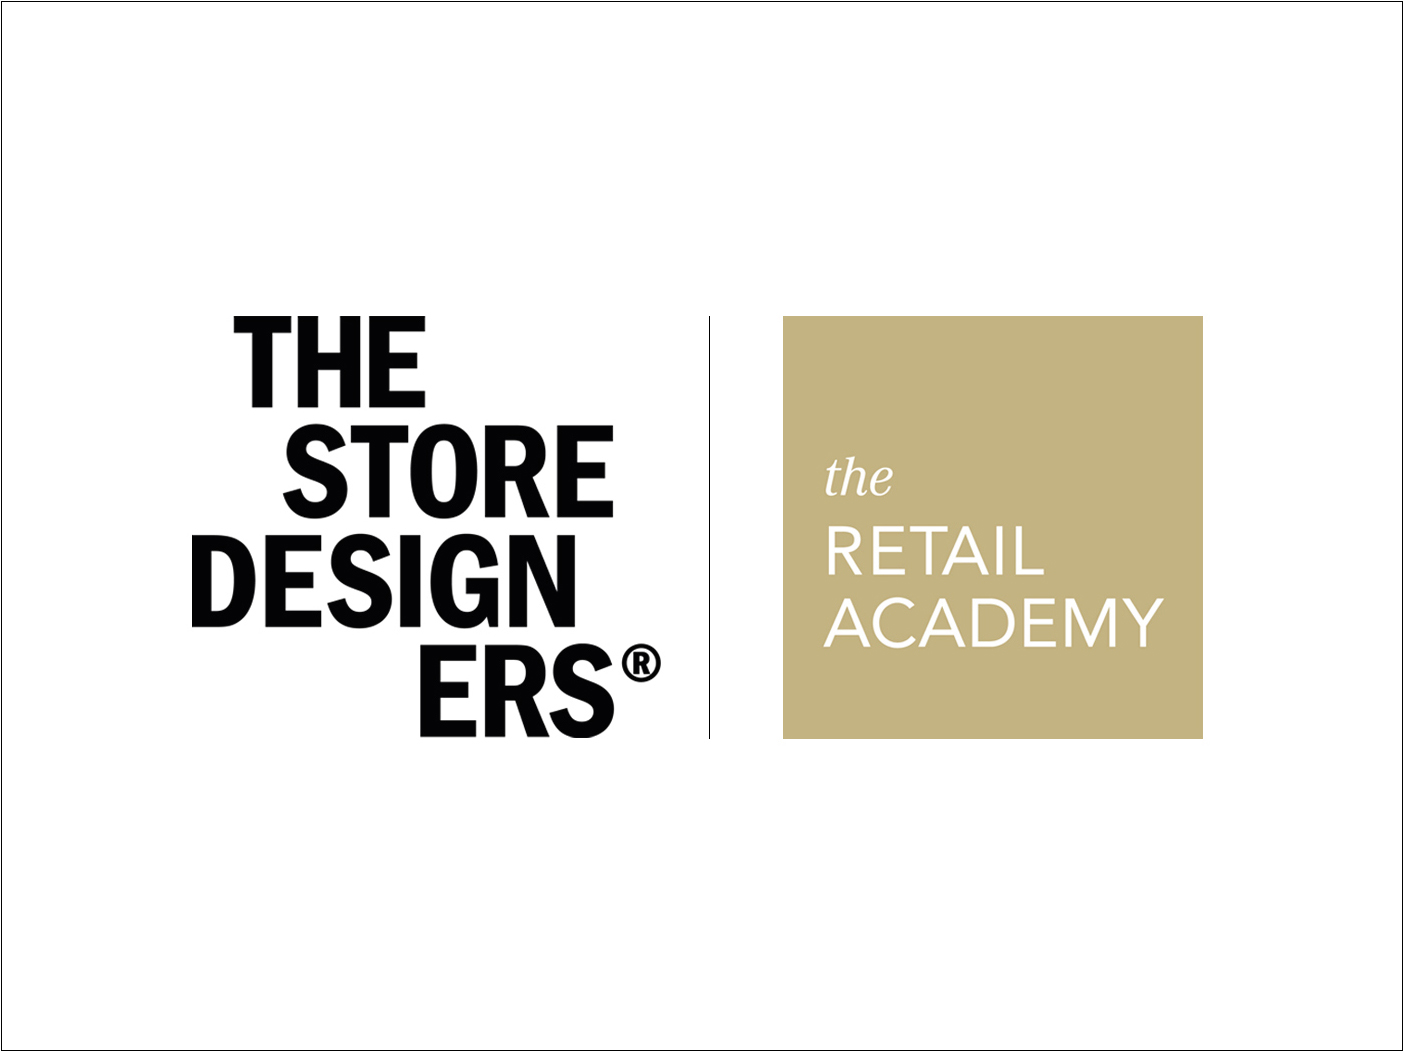 Logos of The Store Designers and The Retail Academy